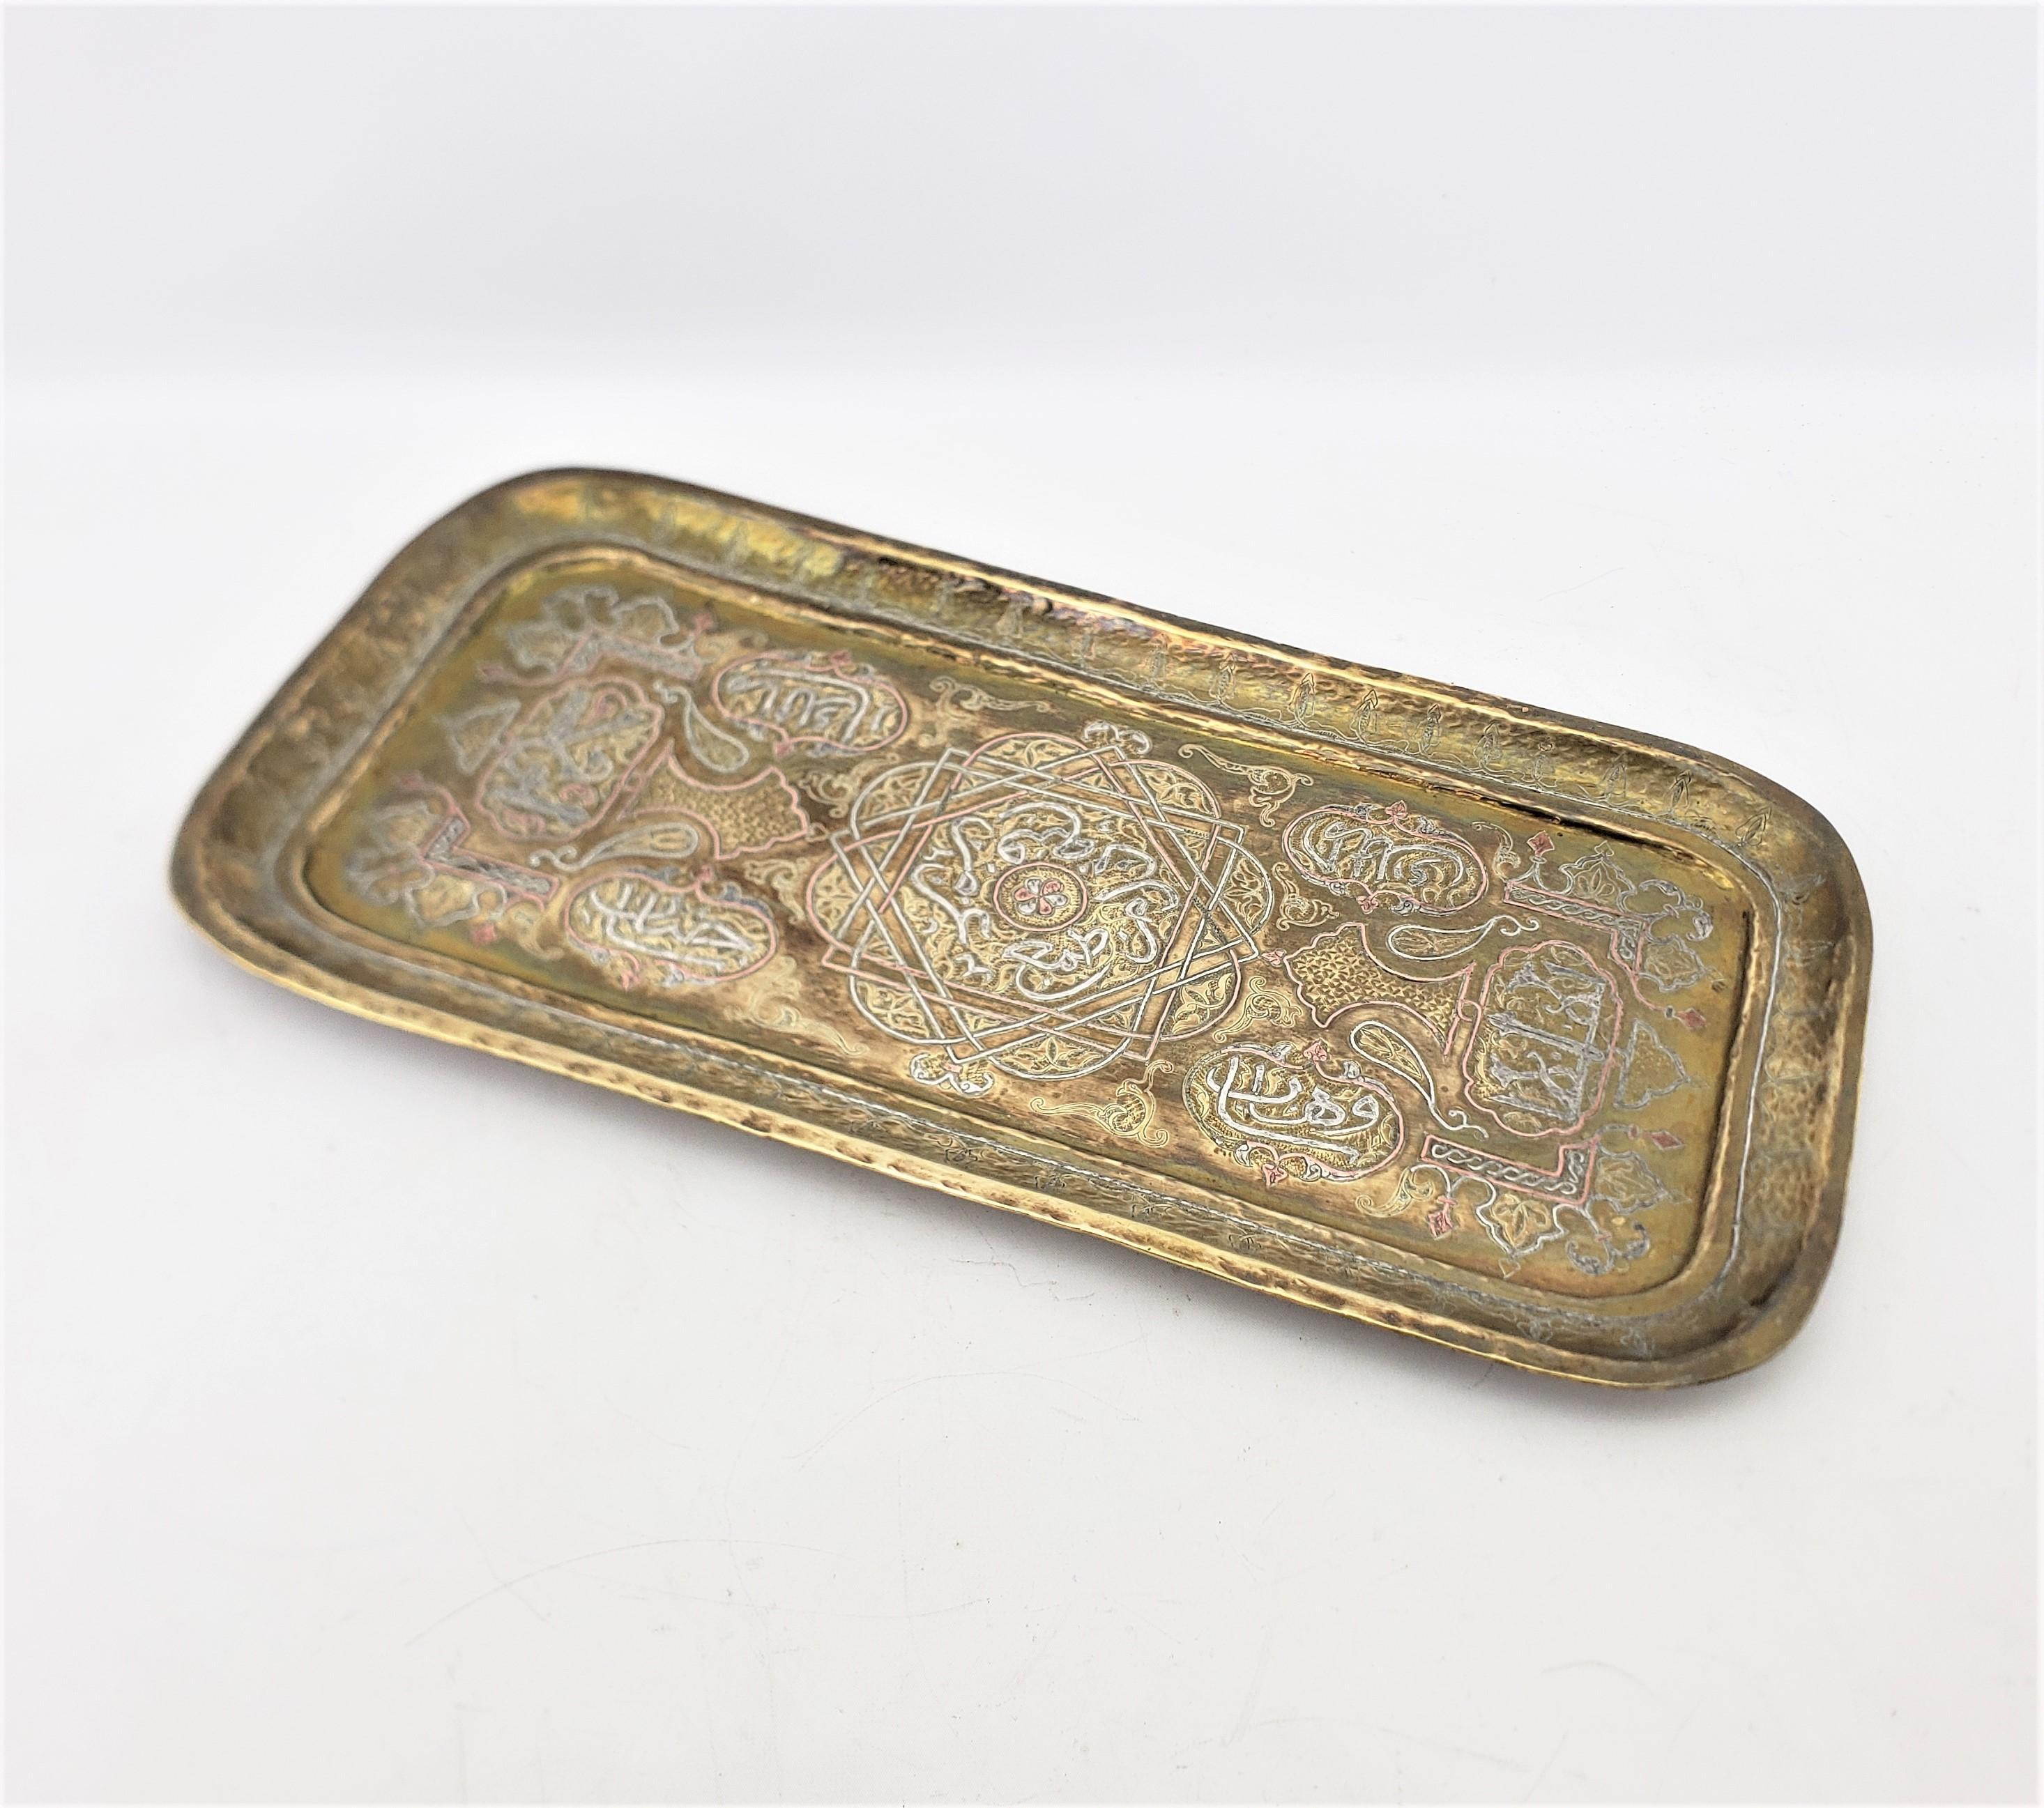 This antique serving tray is unsigned, but presumed to have originated from India and date to approximately 1920 and done in a period Anglo-Indian style. The tray is composed of brass which has been hand-hammered and ornately decorated with applied